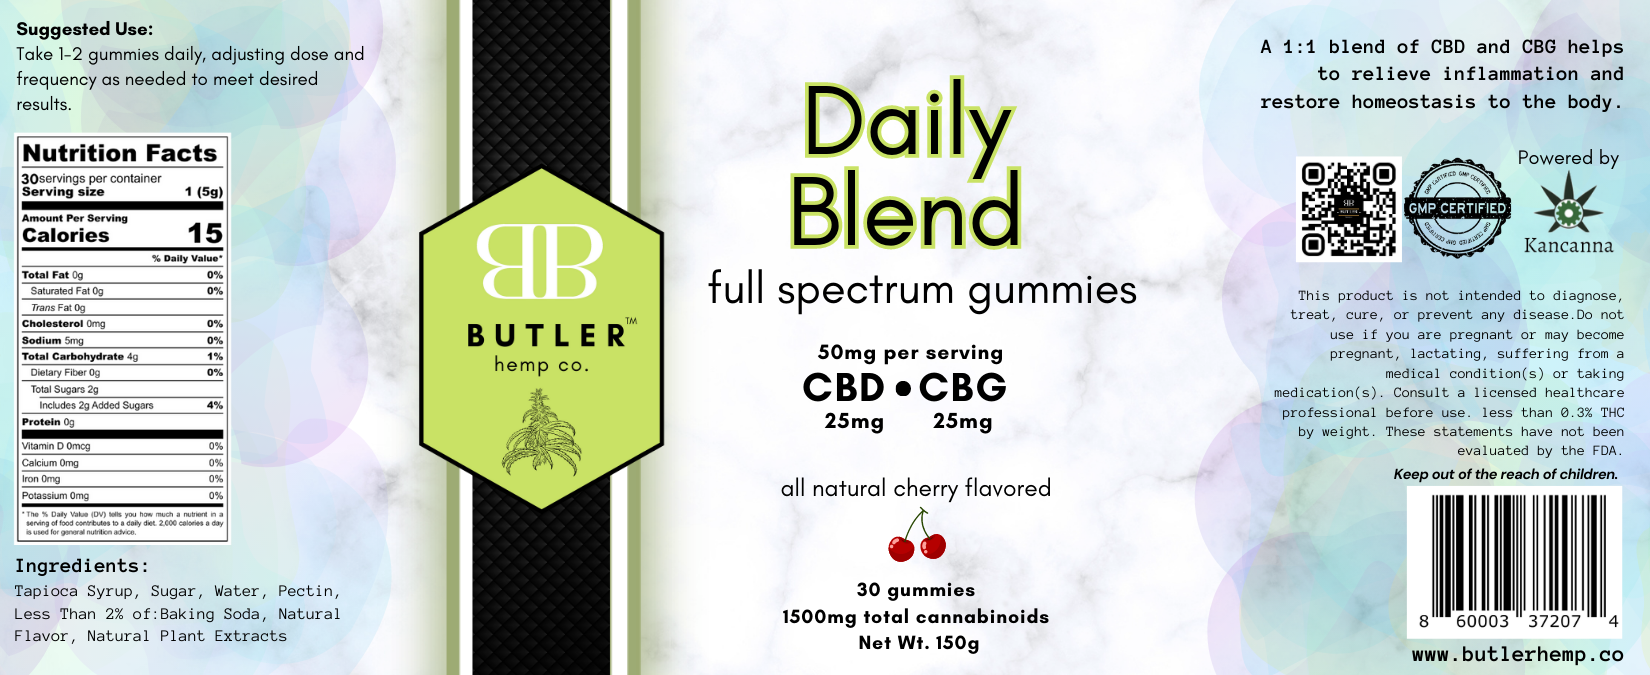 a 1:1 blend of CBD and CBG helps to relieve inflammation and restore homeostasis to the body